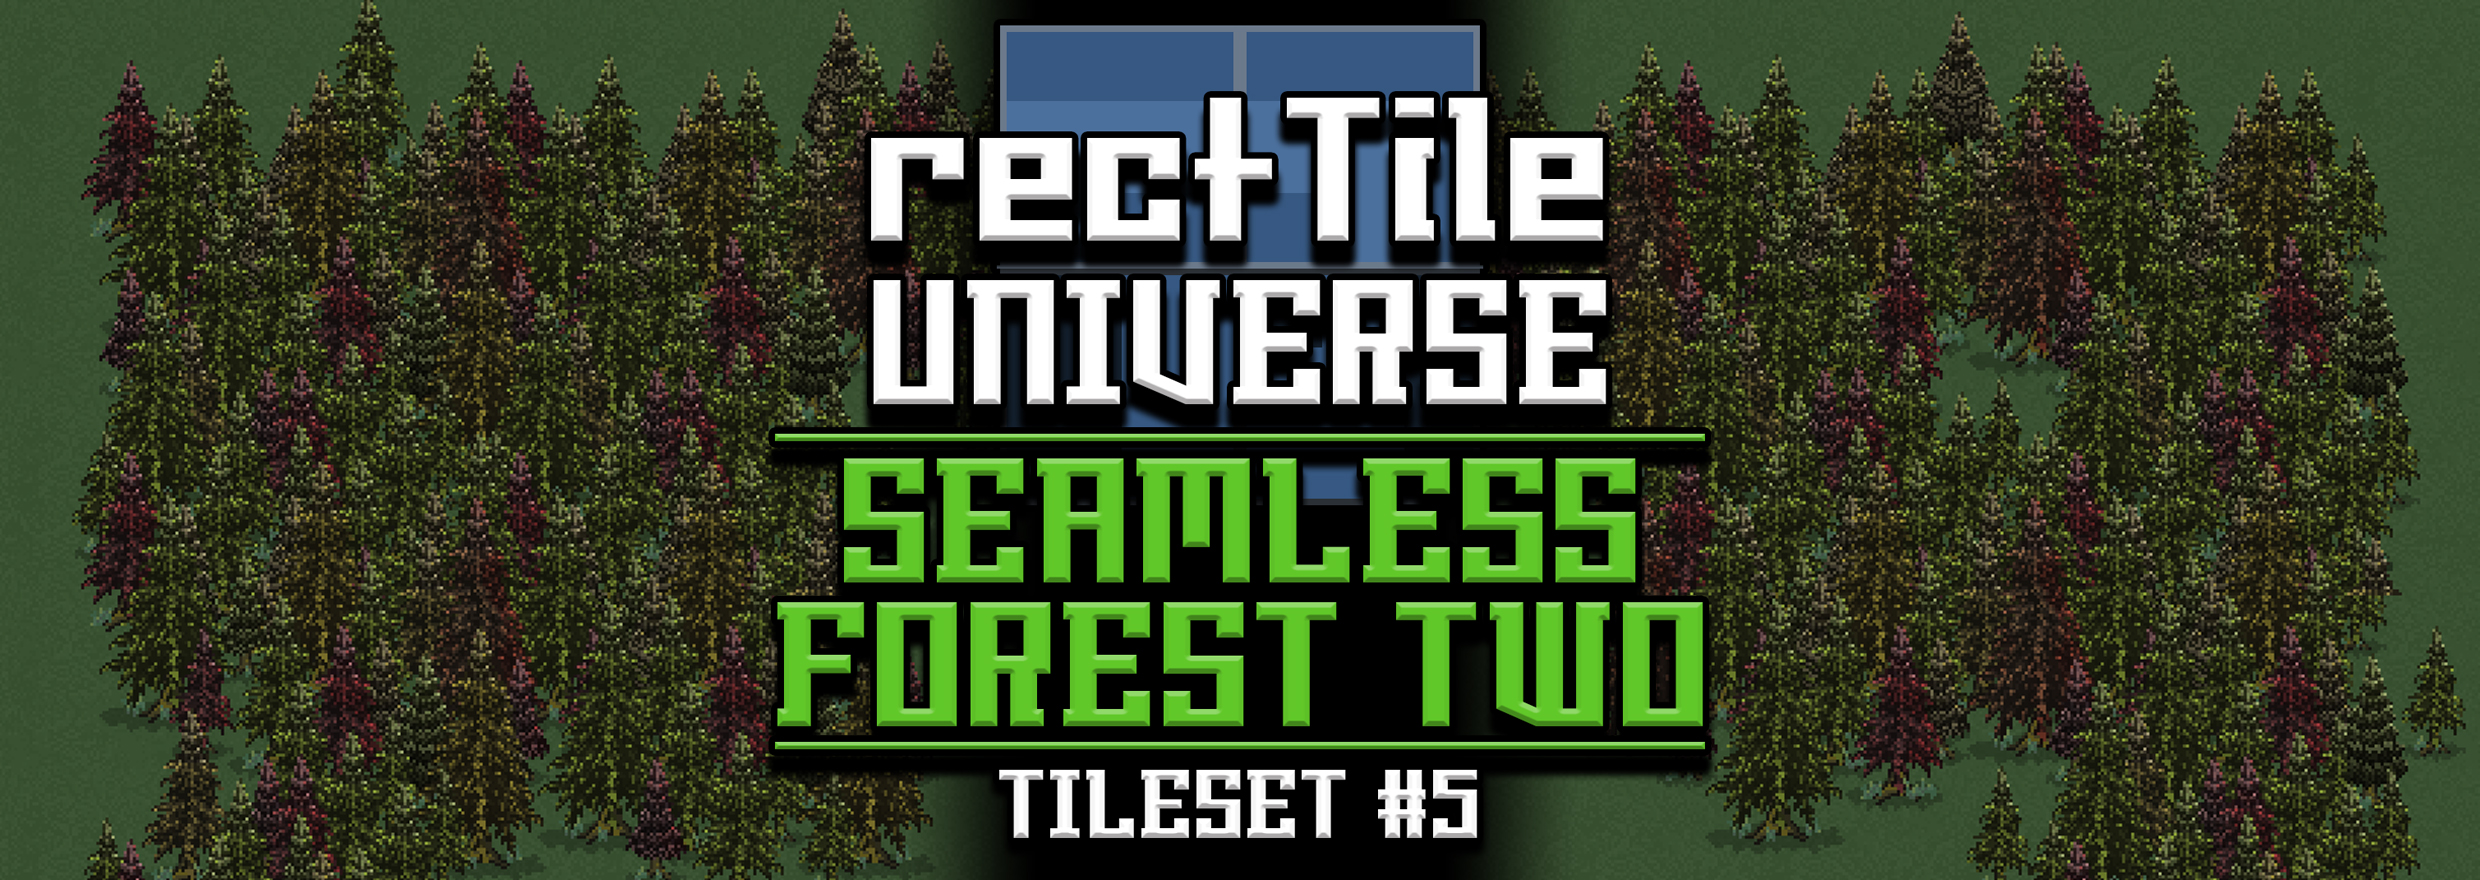 rectTile Universe: Seamless Forest Two